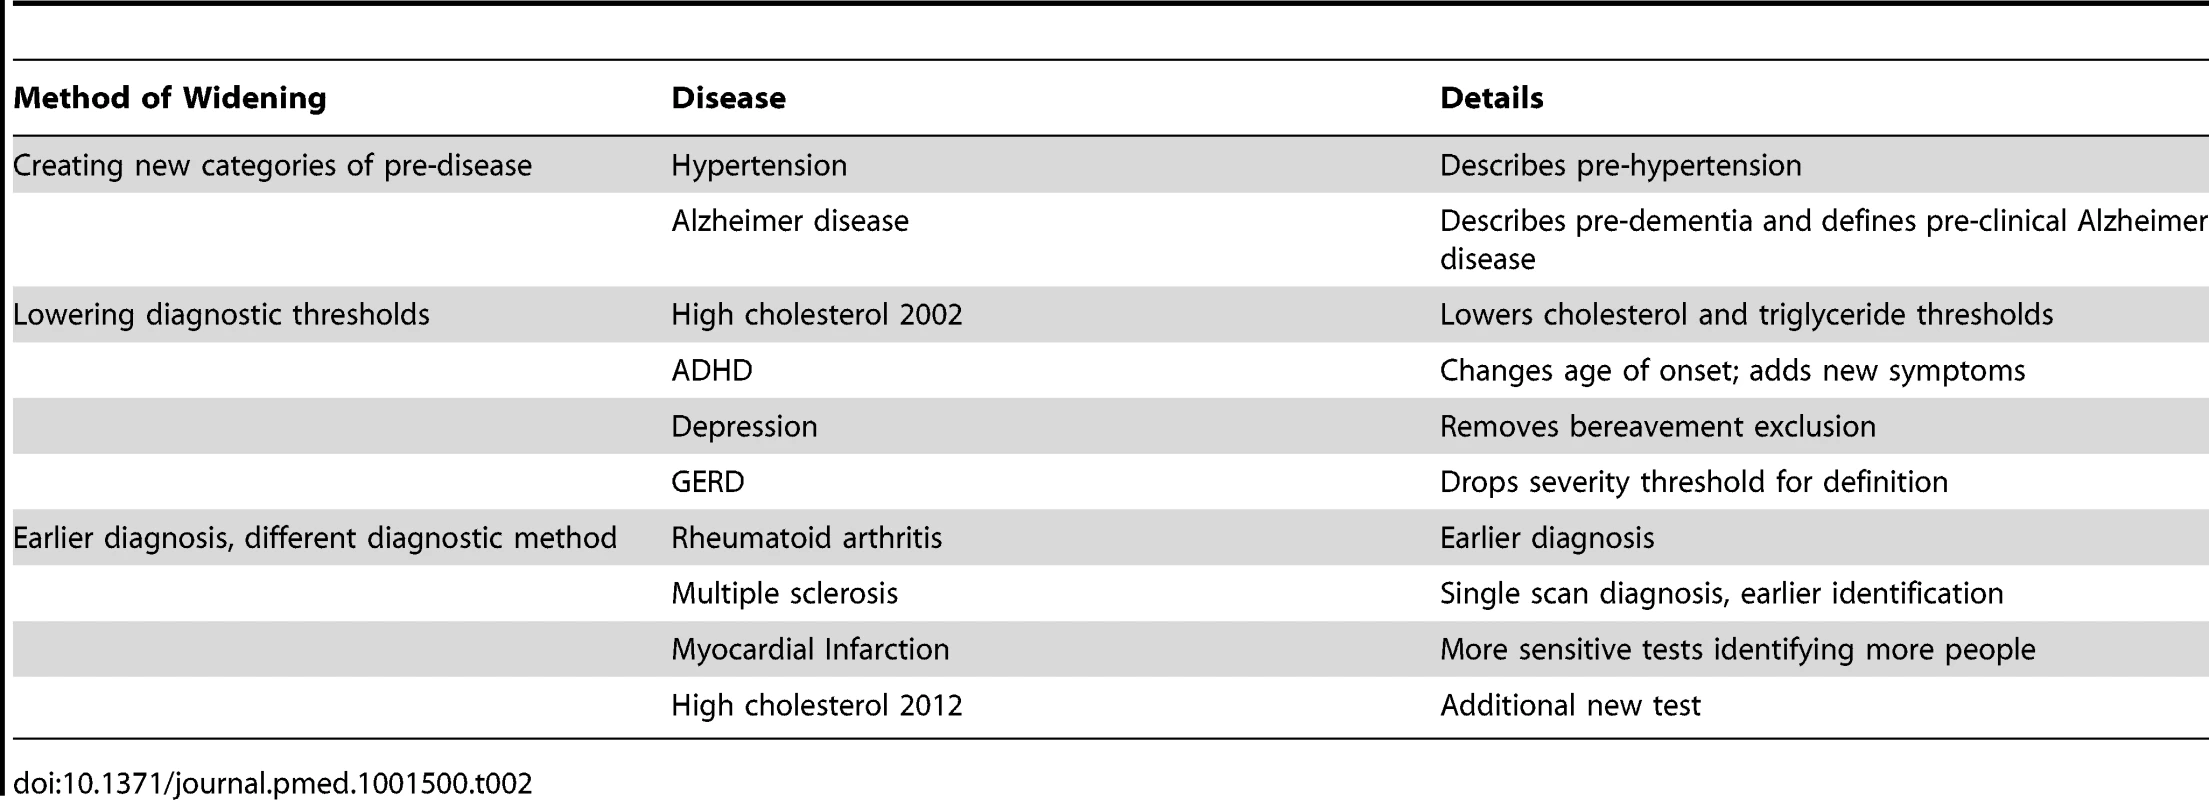 Different ways to expand disease definitions.